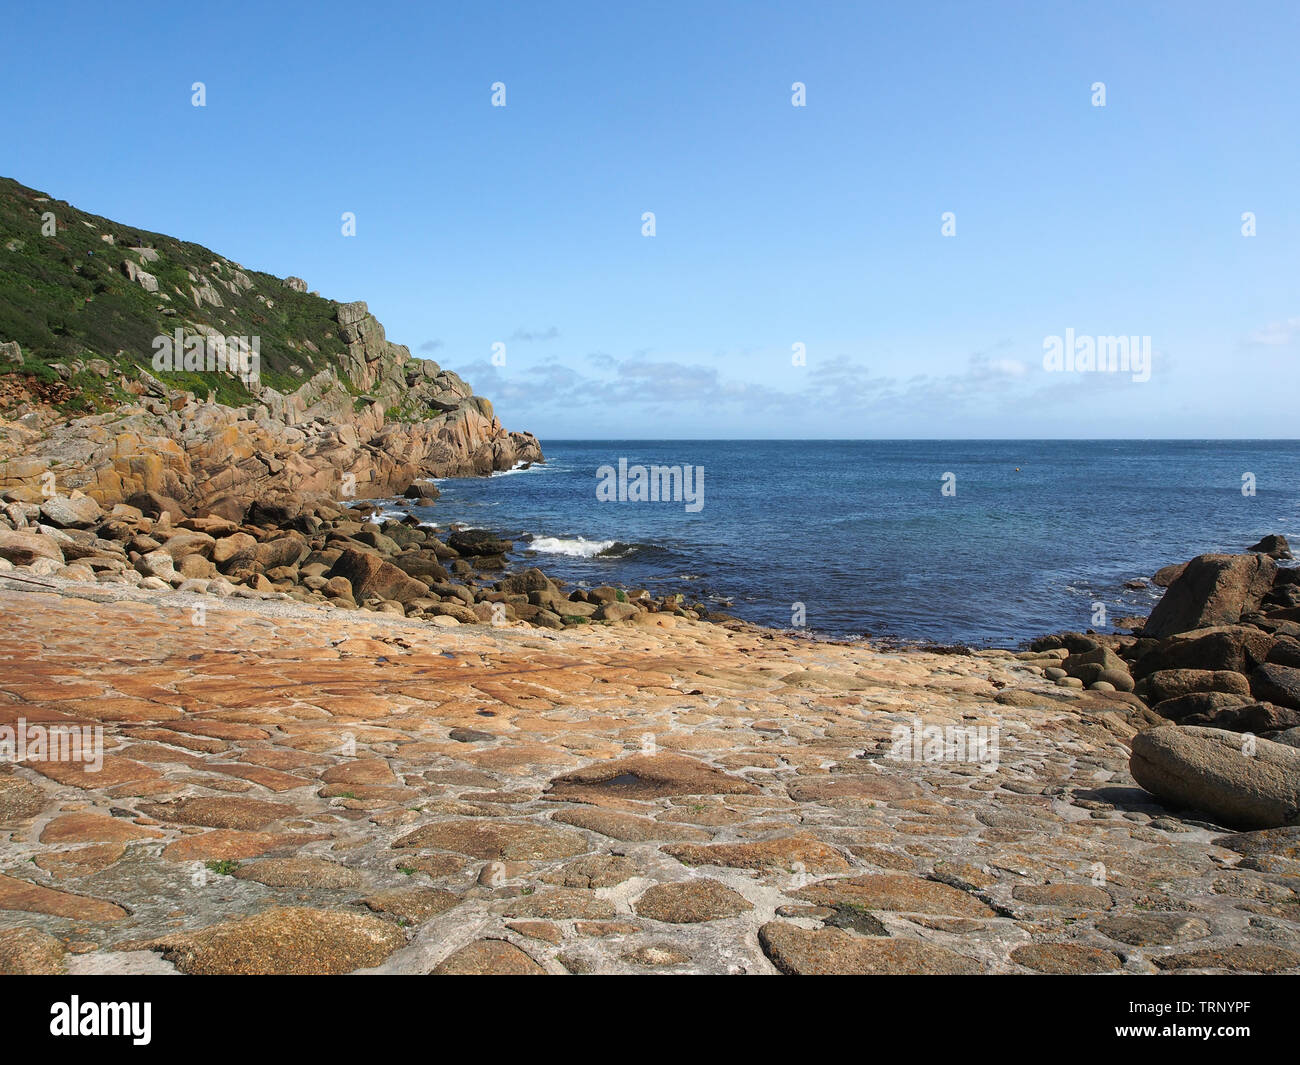 A sunny summers day on the rocky shoreline at Penberth Cove on the Penwith peninsula in Cornwall, England, UK, with blue sea and blue sky. Stock Photo